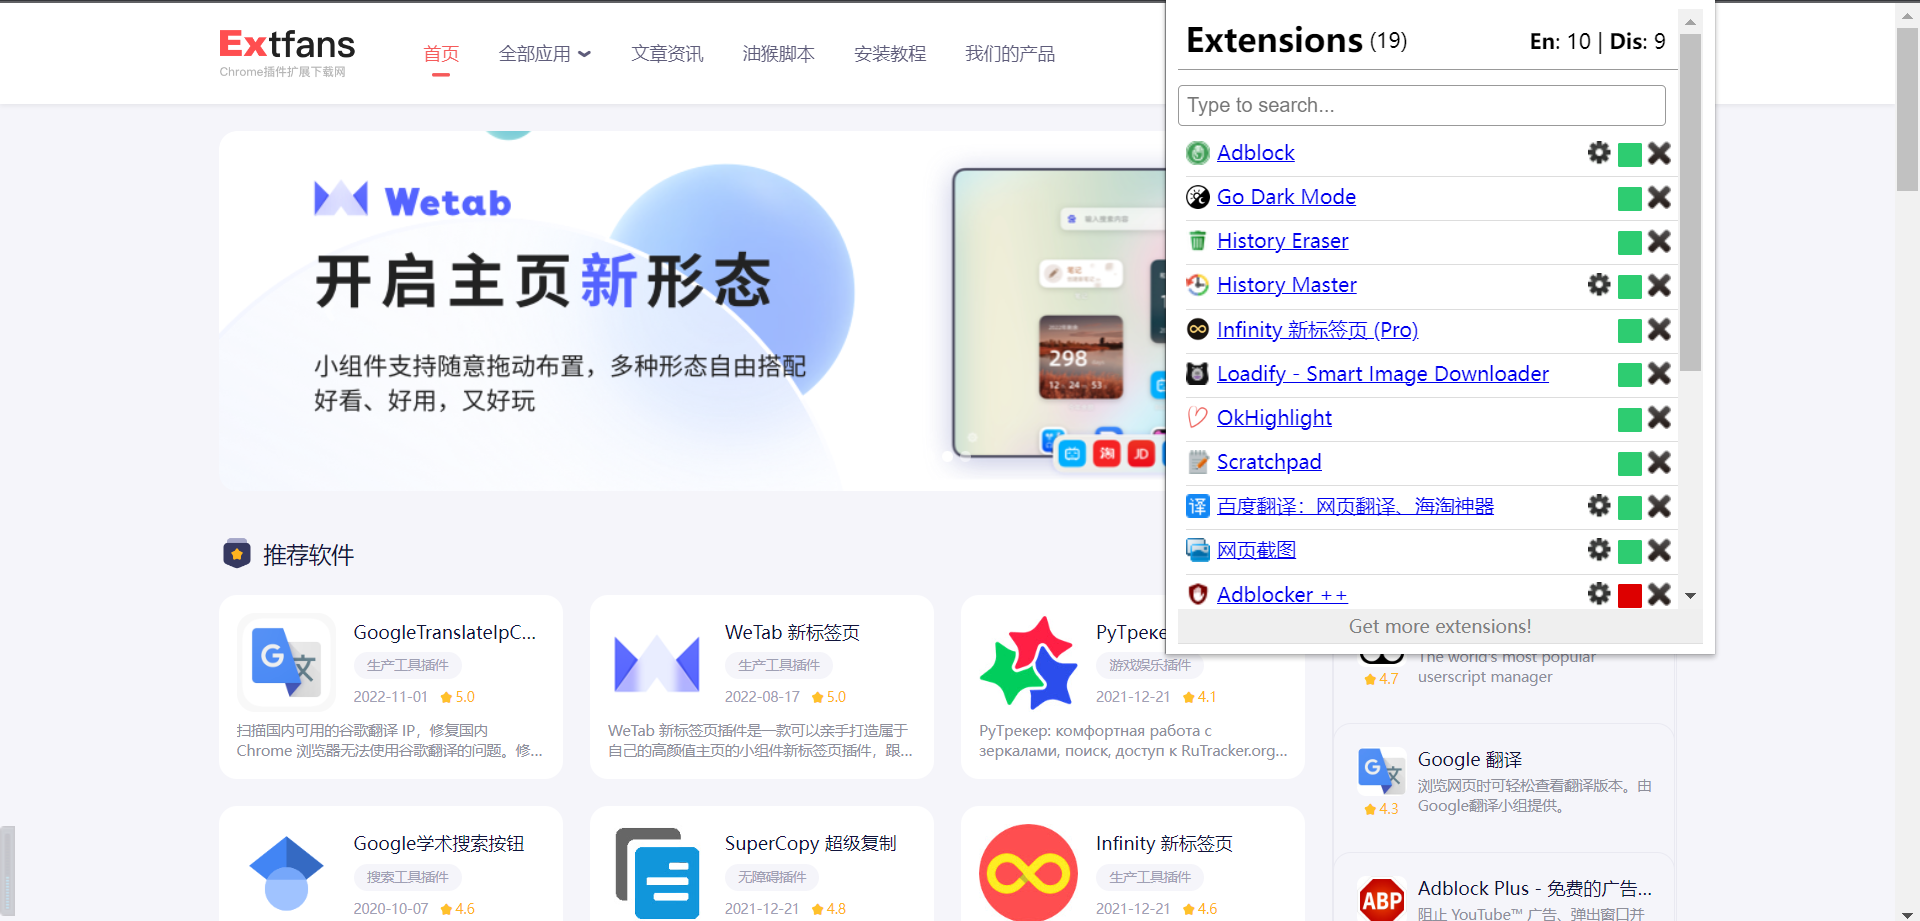 1-Click Extension Manager 插件使用教程